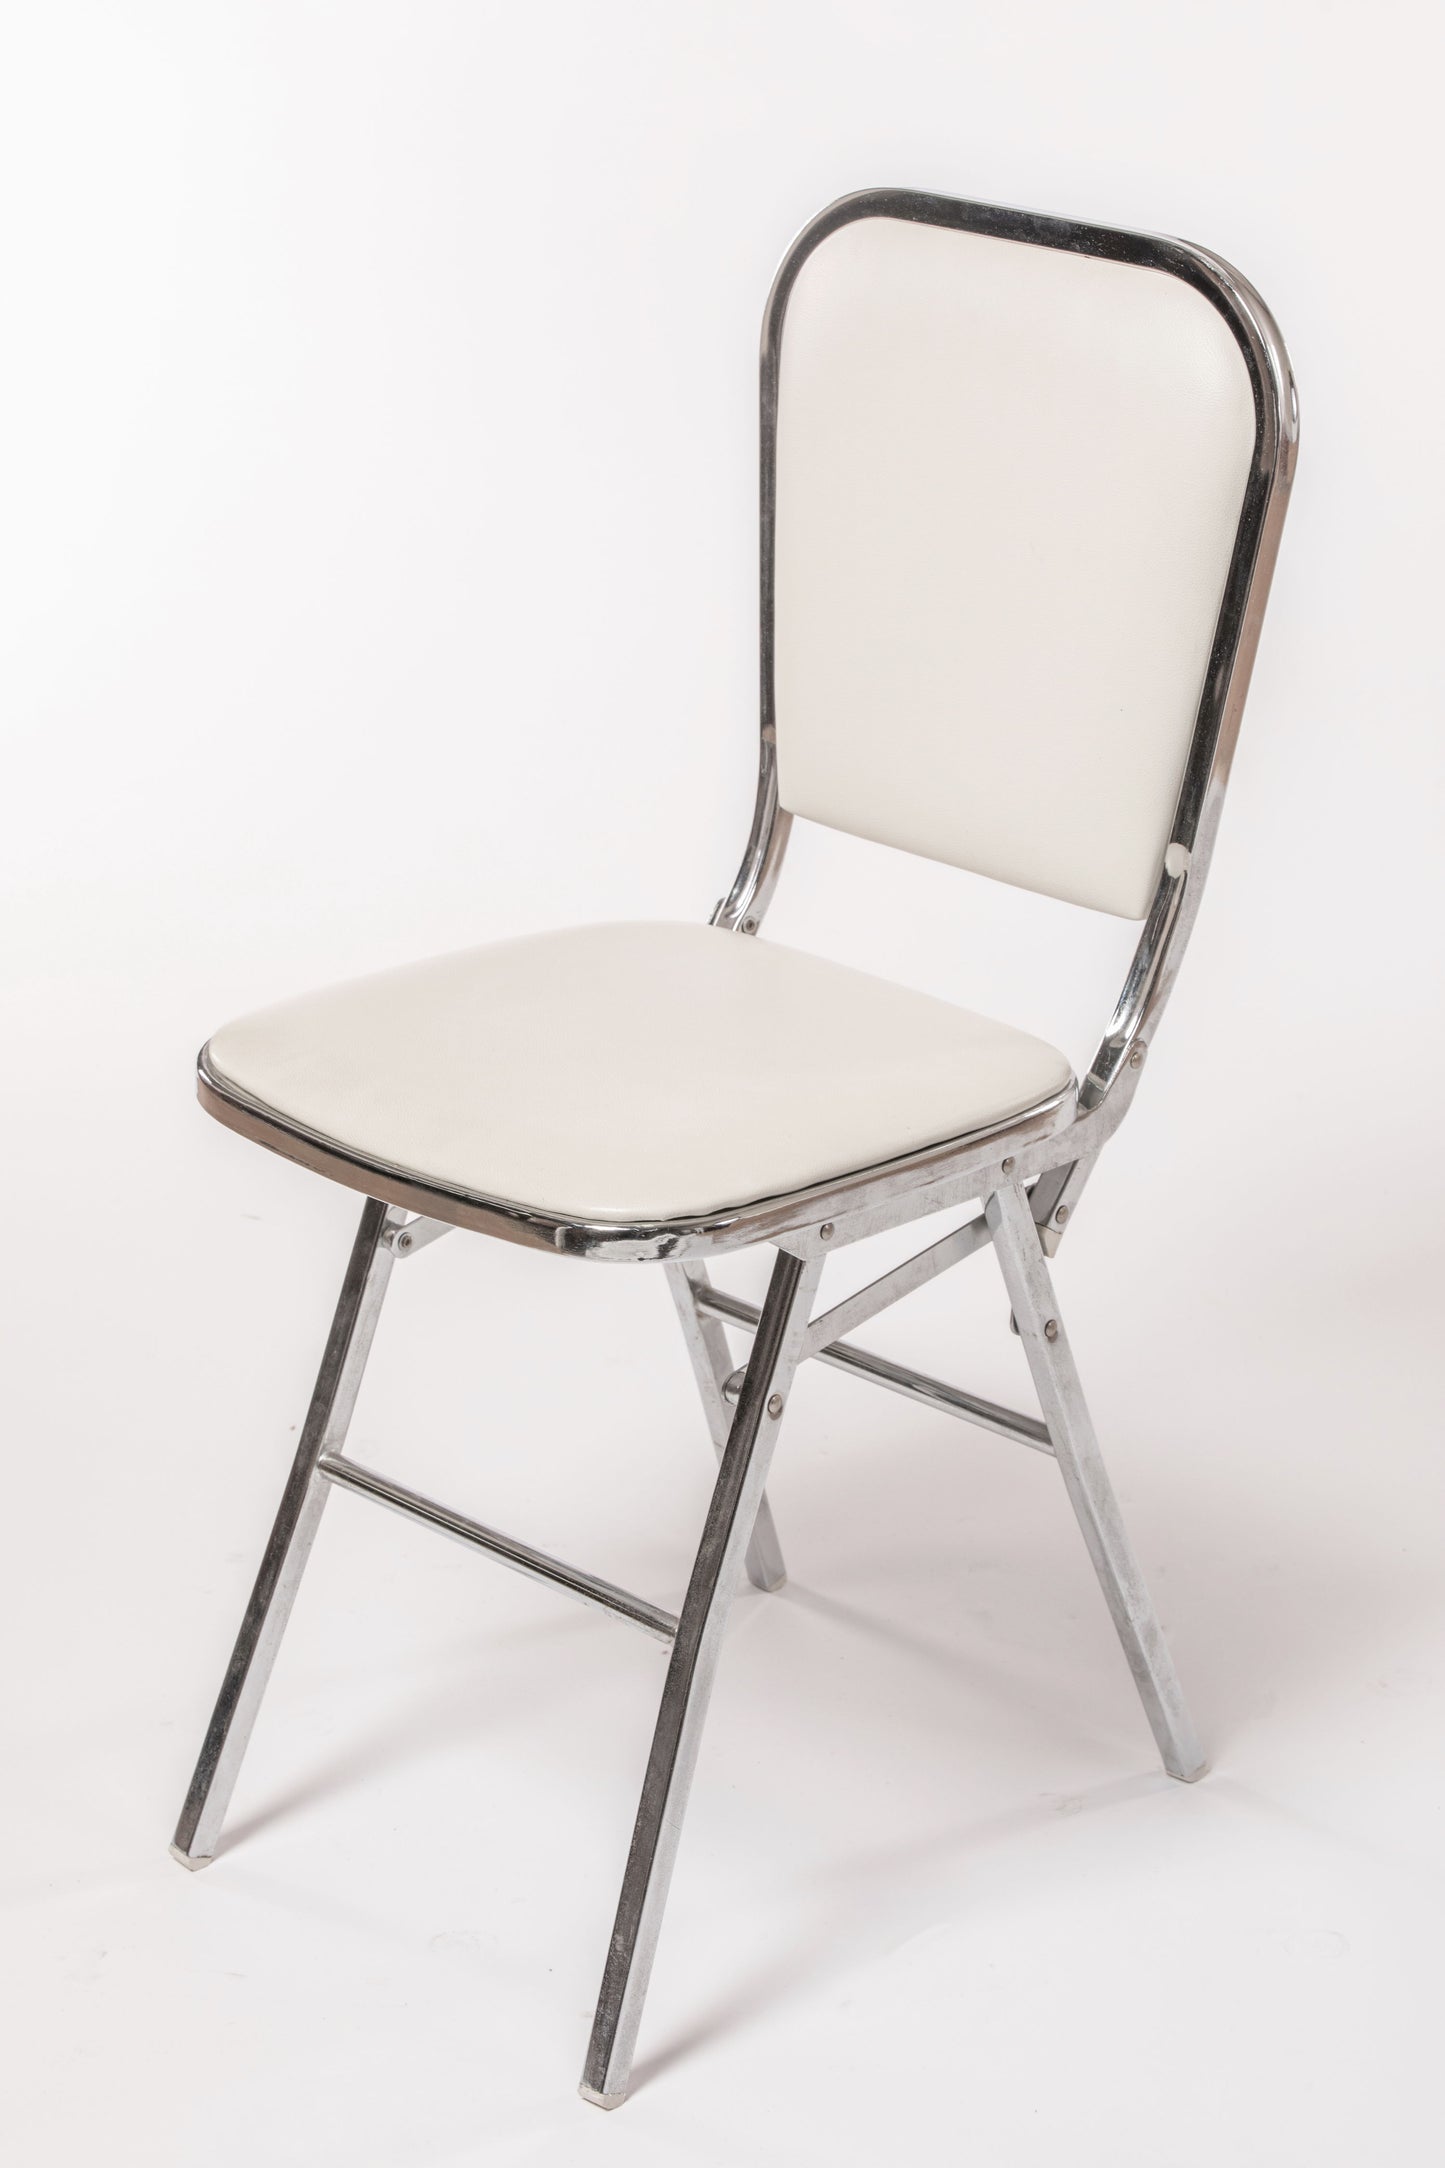 Four white leather folding chairs from the 70s